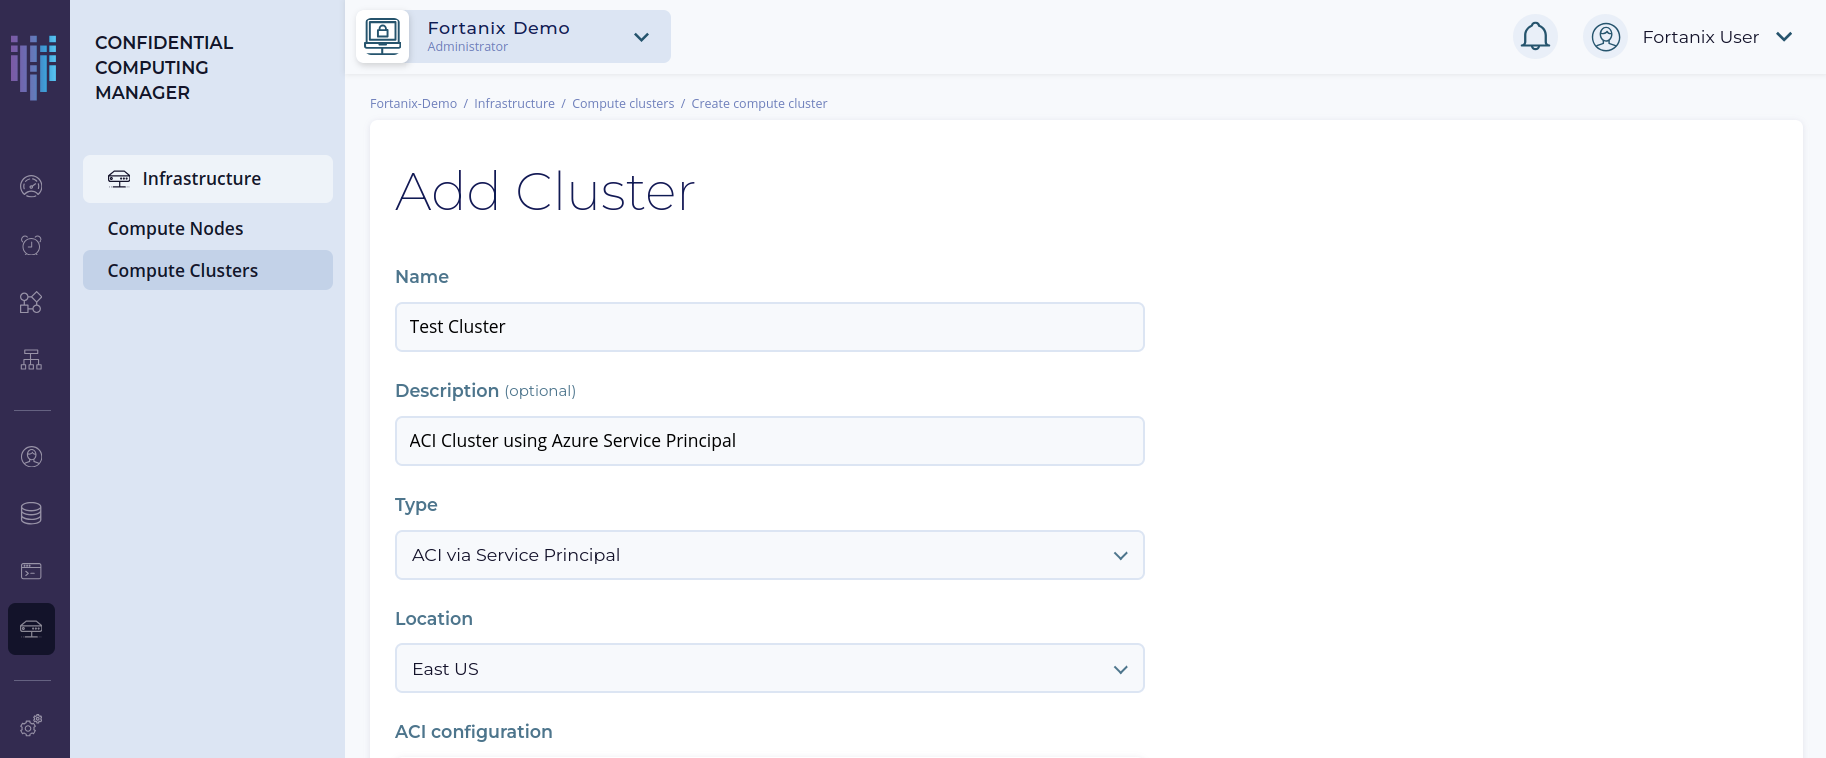 Add-Cluster-Form-1.png